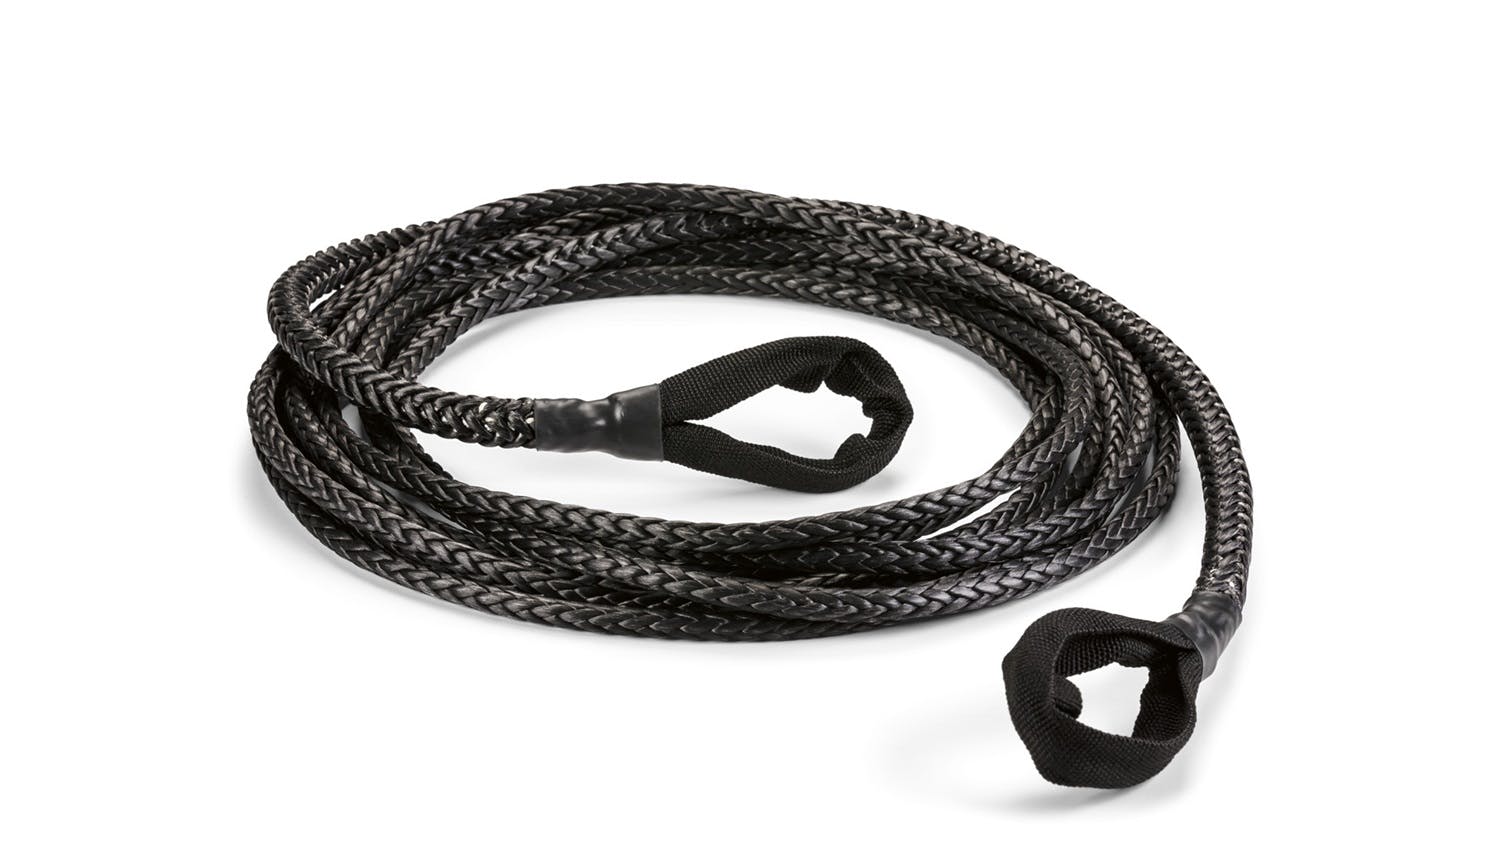 WARN 93119 Standard Duty and Spydura® Synthetic Rope and Extensions